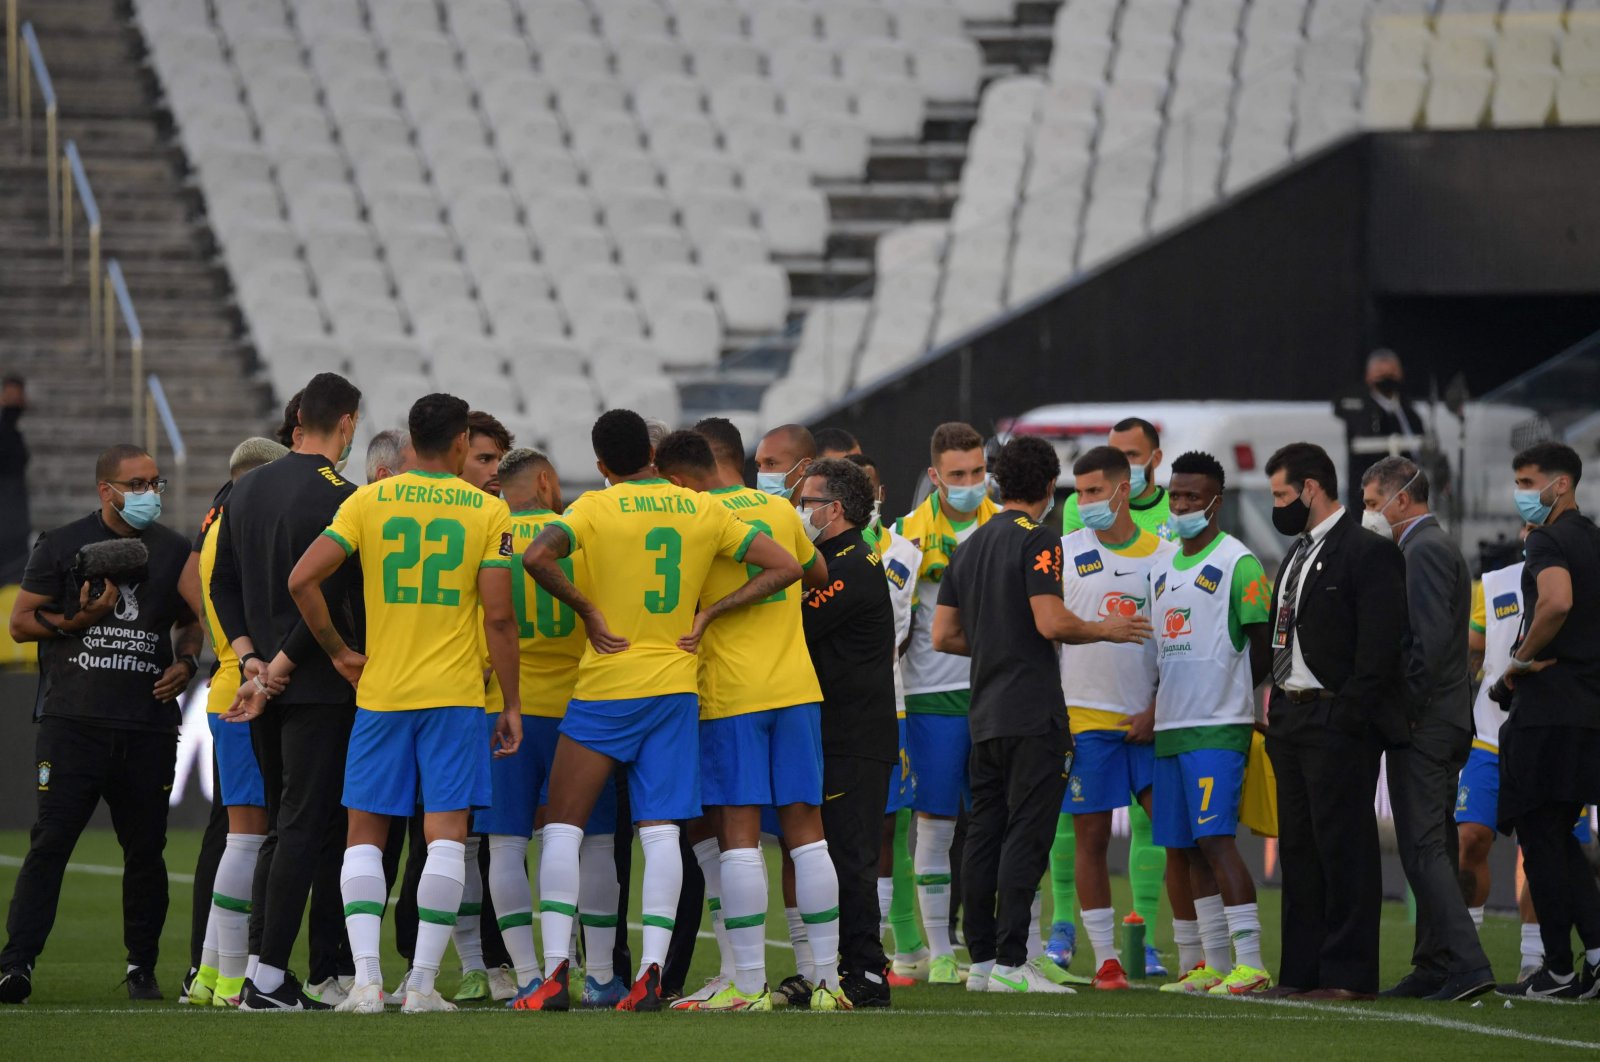 Brazil's players are seen after employees of the National Health Surveillance Agency (Anvisa) entered the field during the South American qualification football match for the FIFA World Cup Qatar 2022 between Brazil and Argentina at the Neo Quimica Arena, also known as Corinthians Arena, in Sao Paulo, Brazil, on Sept. 5, 2021. (AFP Photo)